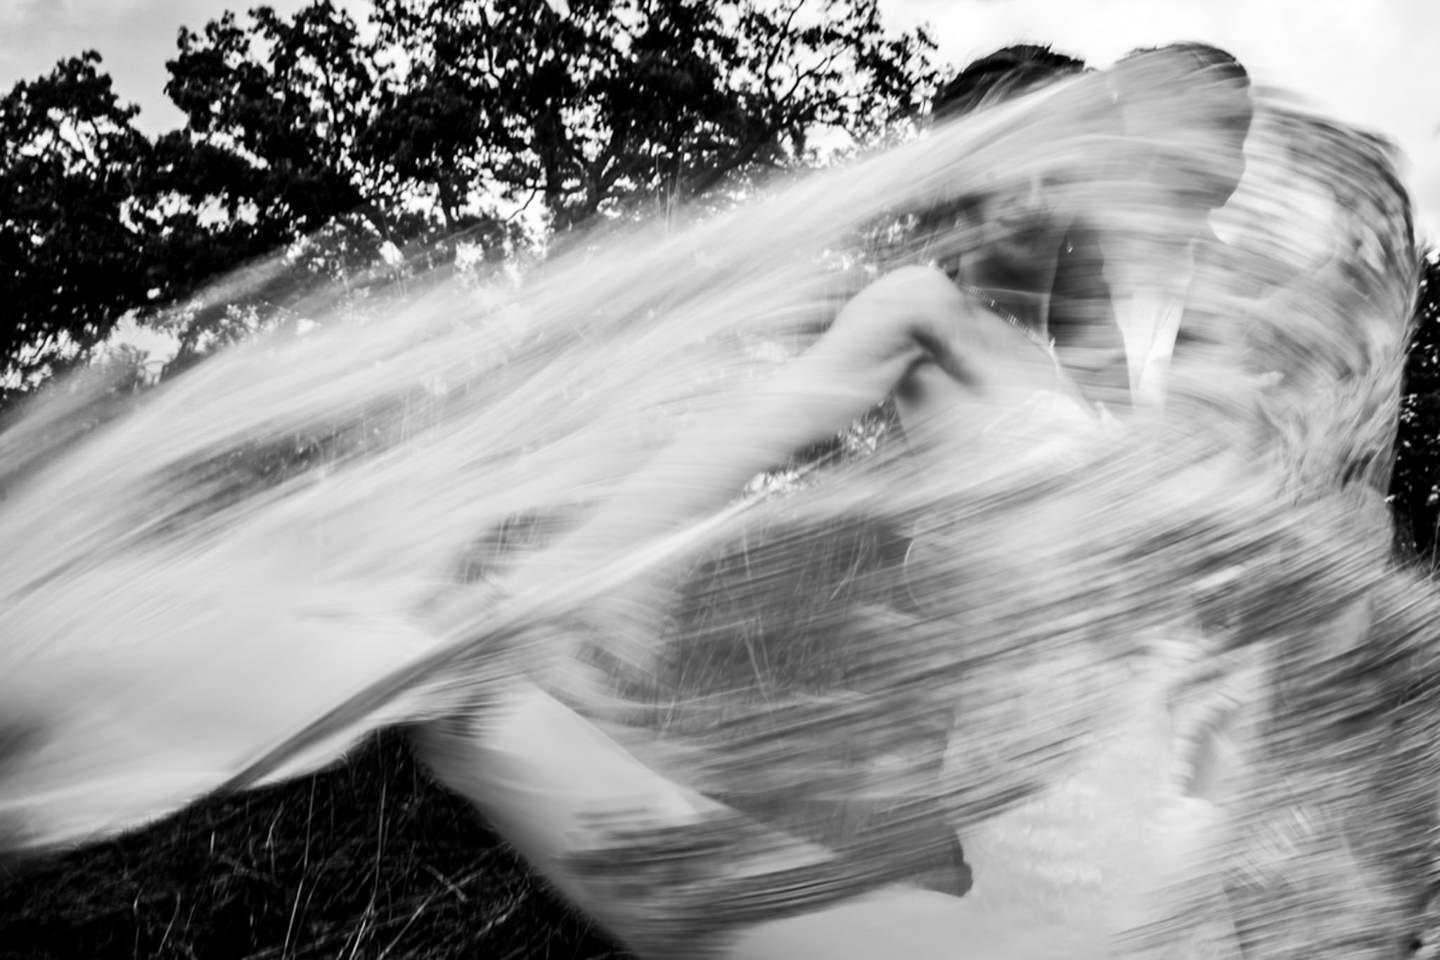 artistic wedding dress photograph in black and white